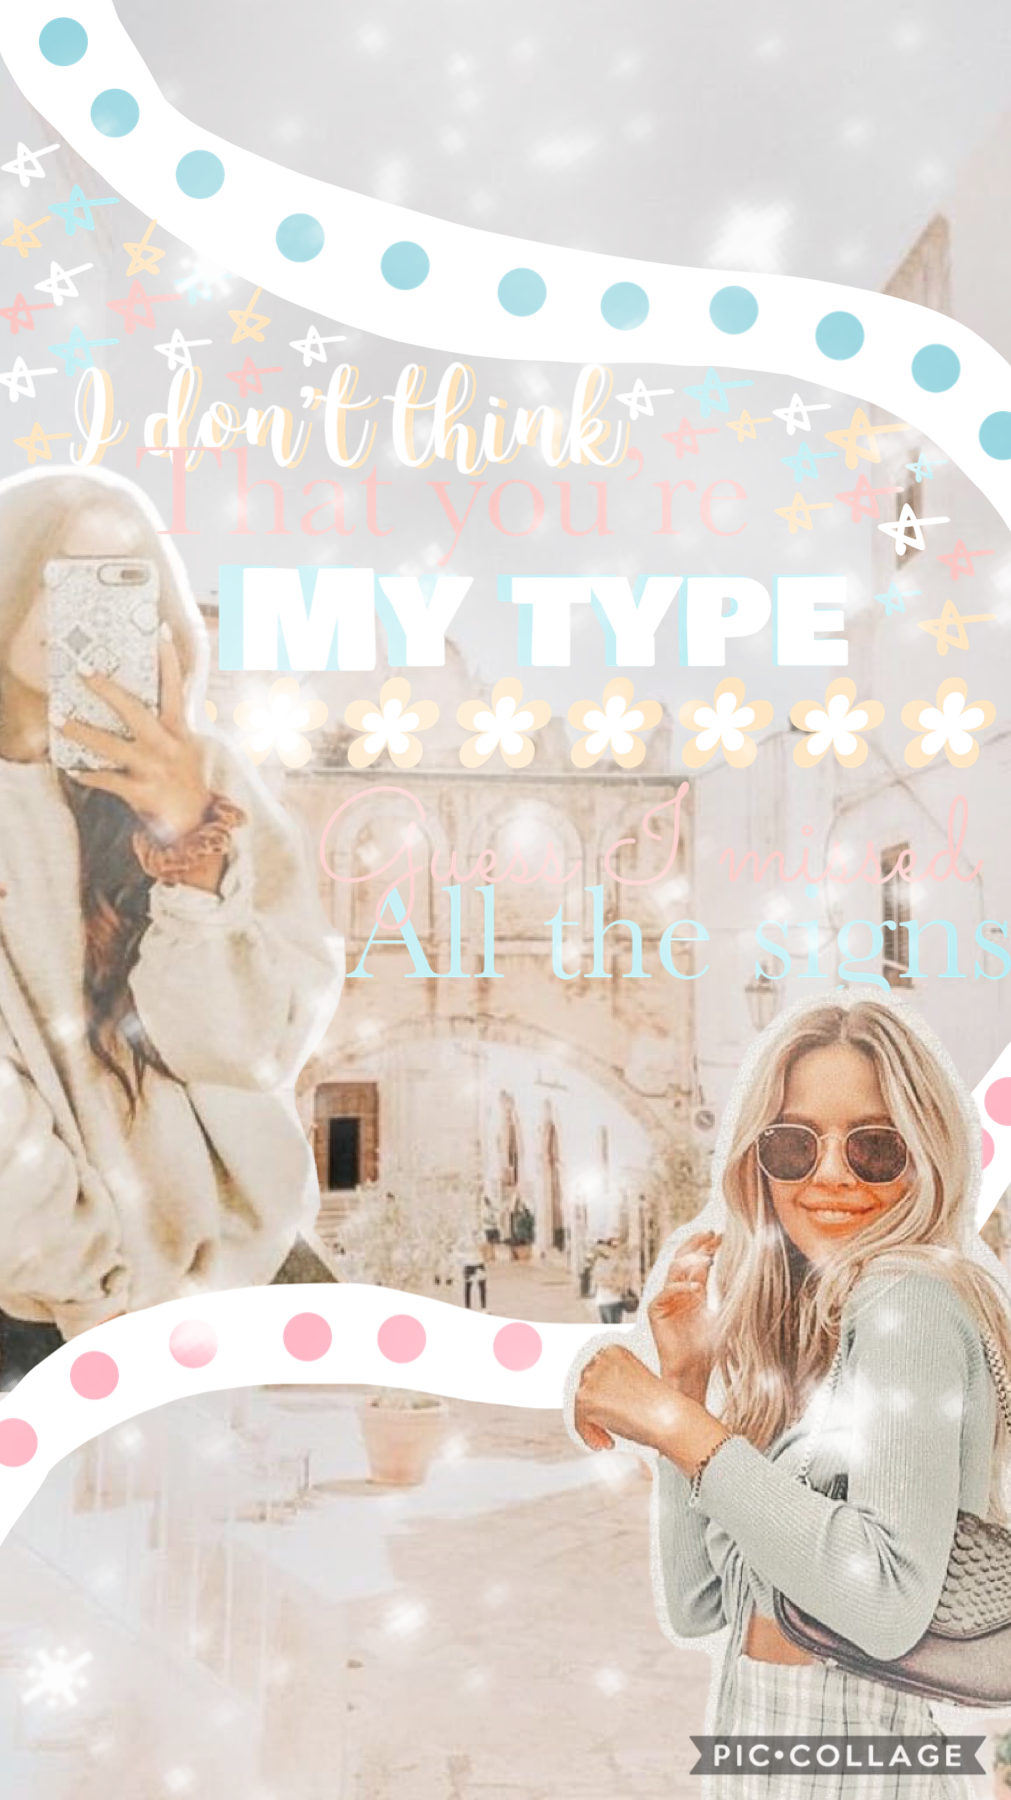 🦋💕✨TAP TAP✨💕🎶
This actually took quite a long time but I new had to post something because it’s been a while! Can you guess the song! 🎶💕